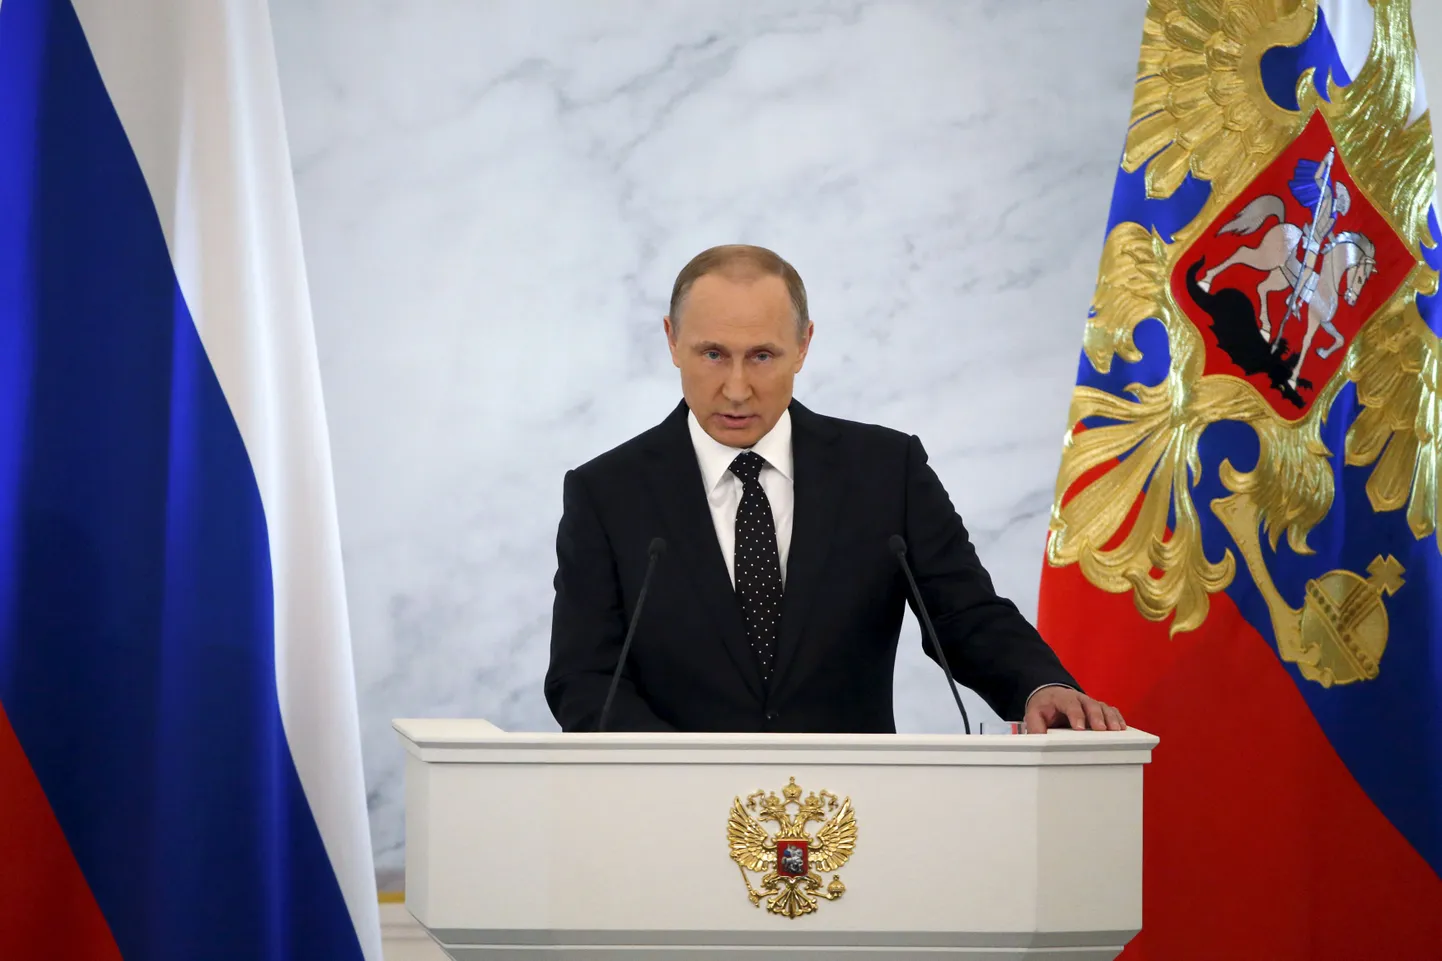 Russian President Vladimir Putin addresses the Federal Assembly, including State Duma deputies, members of the Federation Council, regional governors and civil society representatives, at the Kremlin in Moscow, Russia, December 3, 2015. Turkey will regret "more than once" about its shooting down of a Russian bomber jet near the Syrian-Turkish border, Putin said on Thursday, adding Moscow would not ignore Ankara's "aiding of terrorists".  REUTERS/Sergei Karpukhin